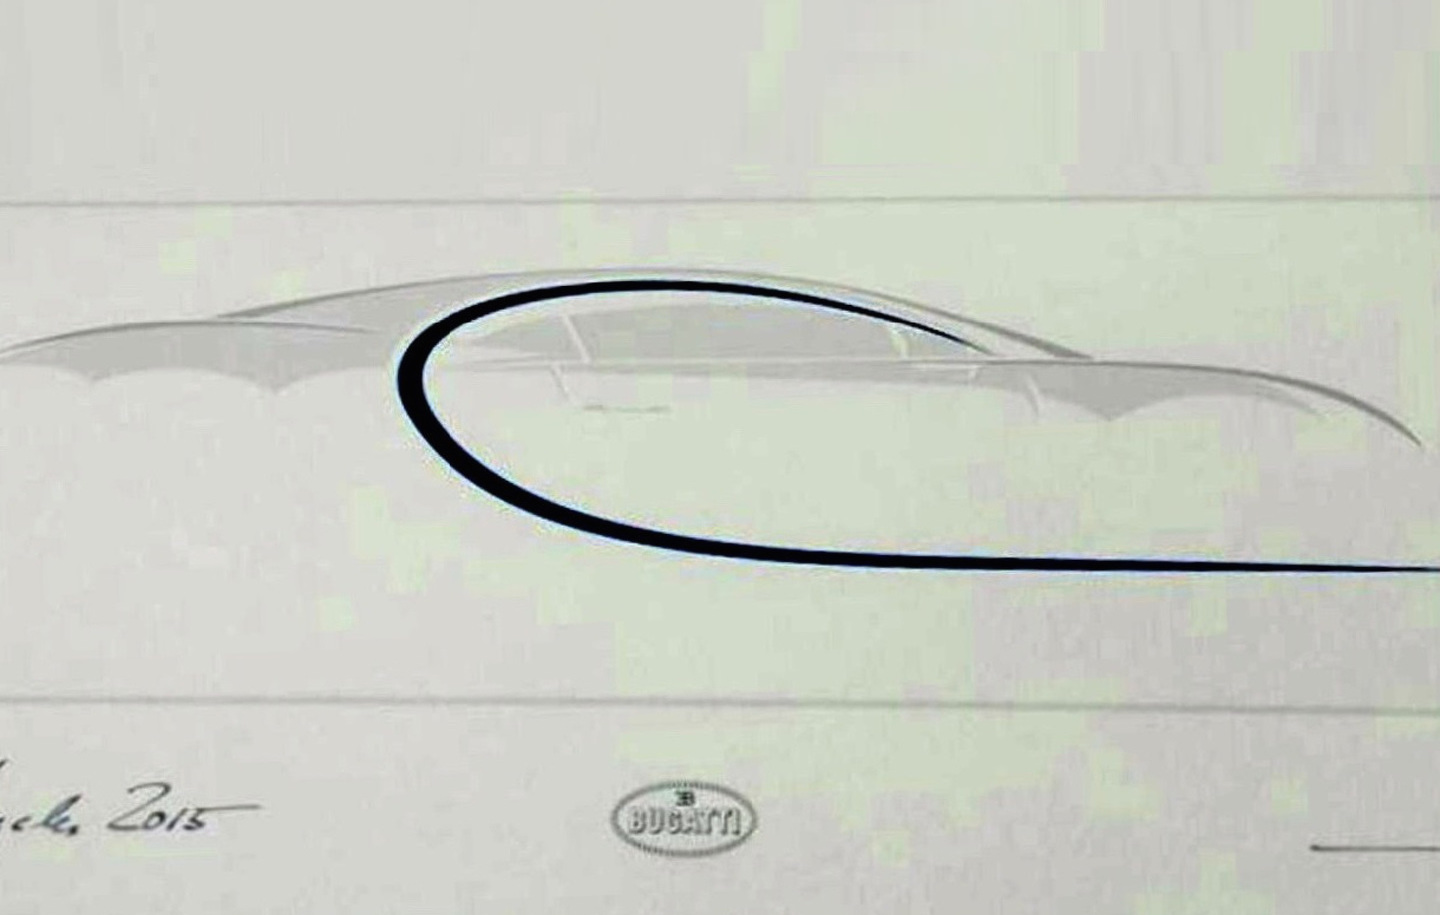 Bugatti Chiron previewed to potential buyers with sketch?